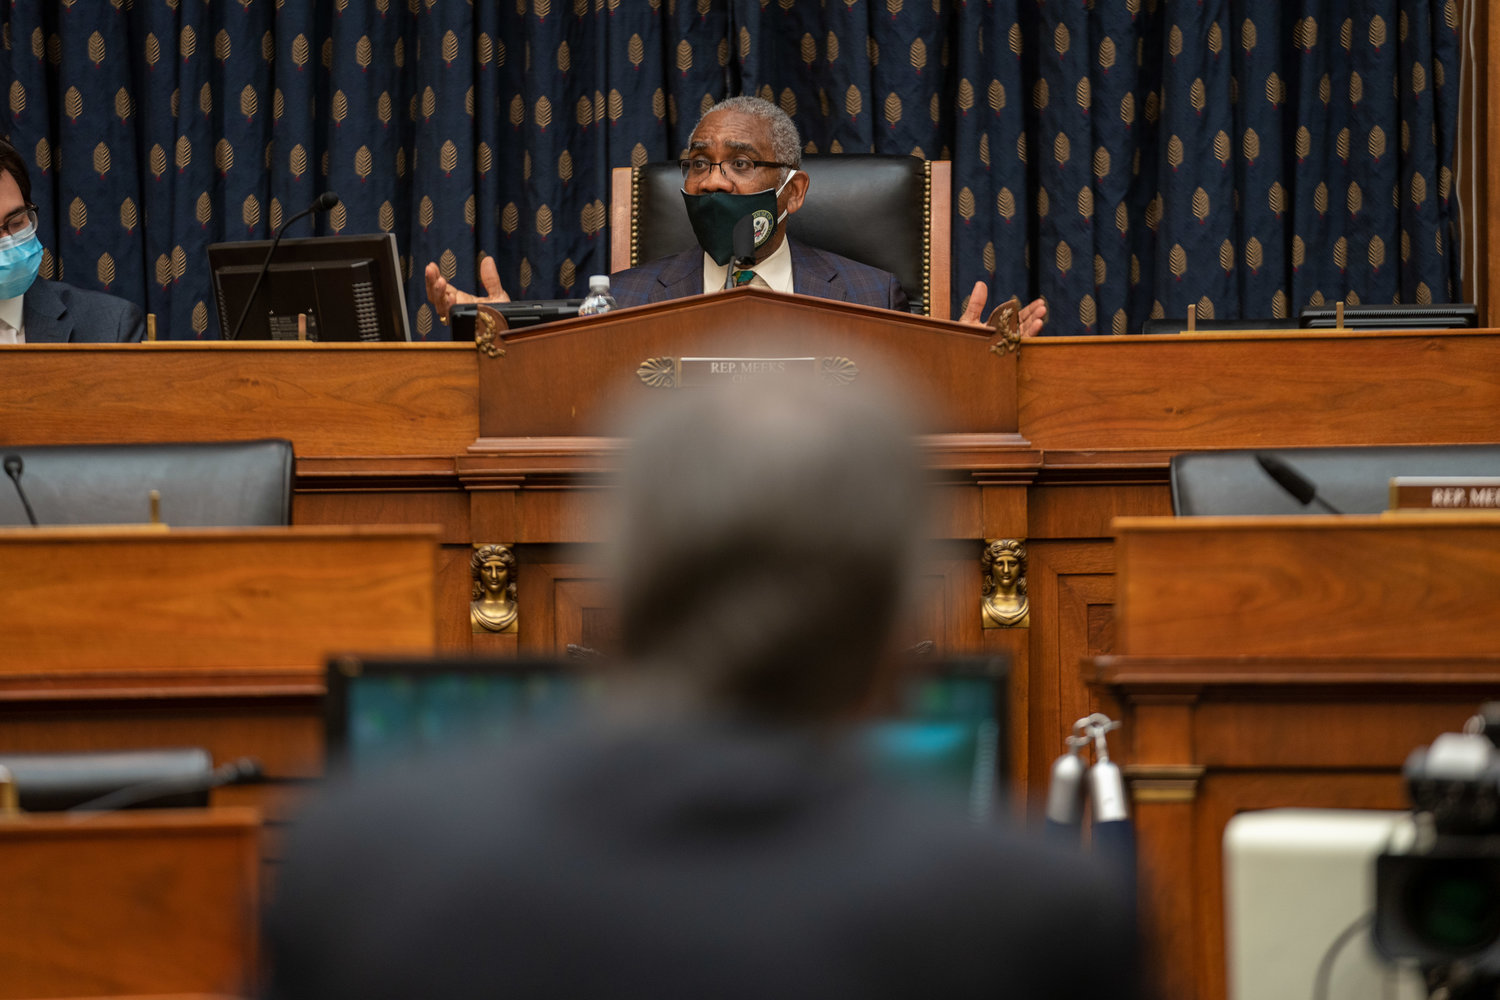 U.S. House Committee on Foreign Affairs Chairman Gregory W. Meeks, D.N.Y., is shown at a hearing in March 2021 in Washington, D.C. Meeks  and ranking member Michael McCaul have been unable to craft a bipartisan China bill.  (Ken Cedeno/Pool/Getty Images/TNS)